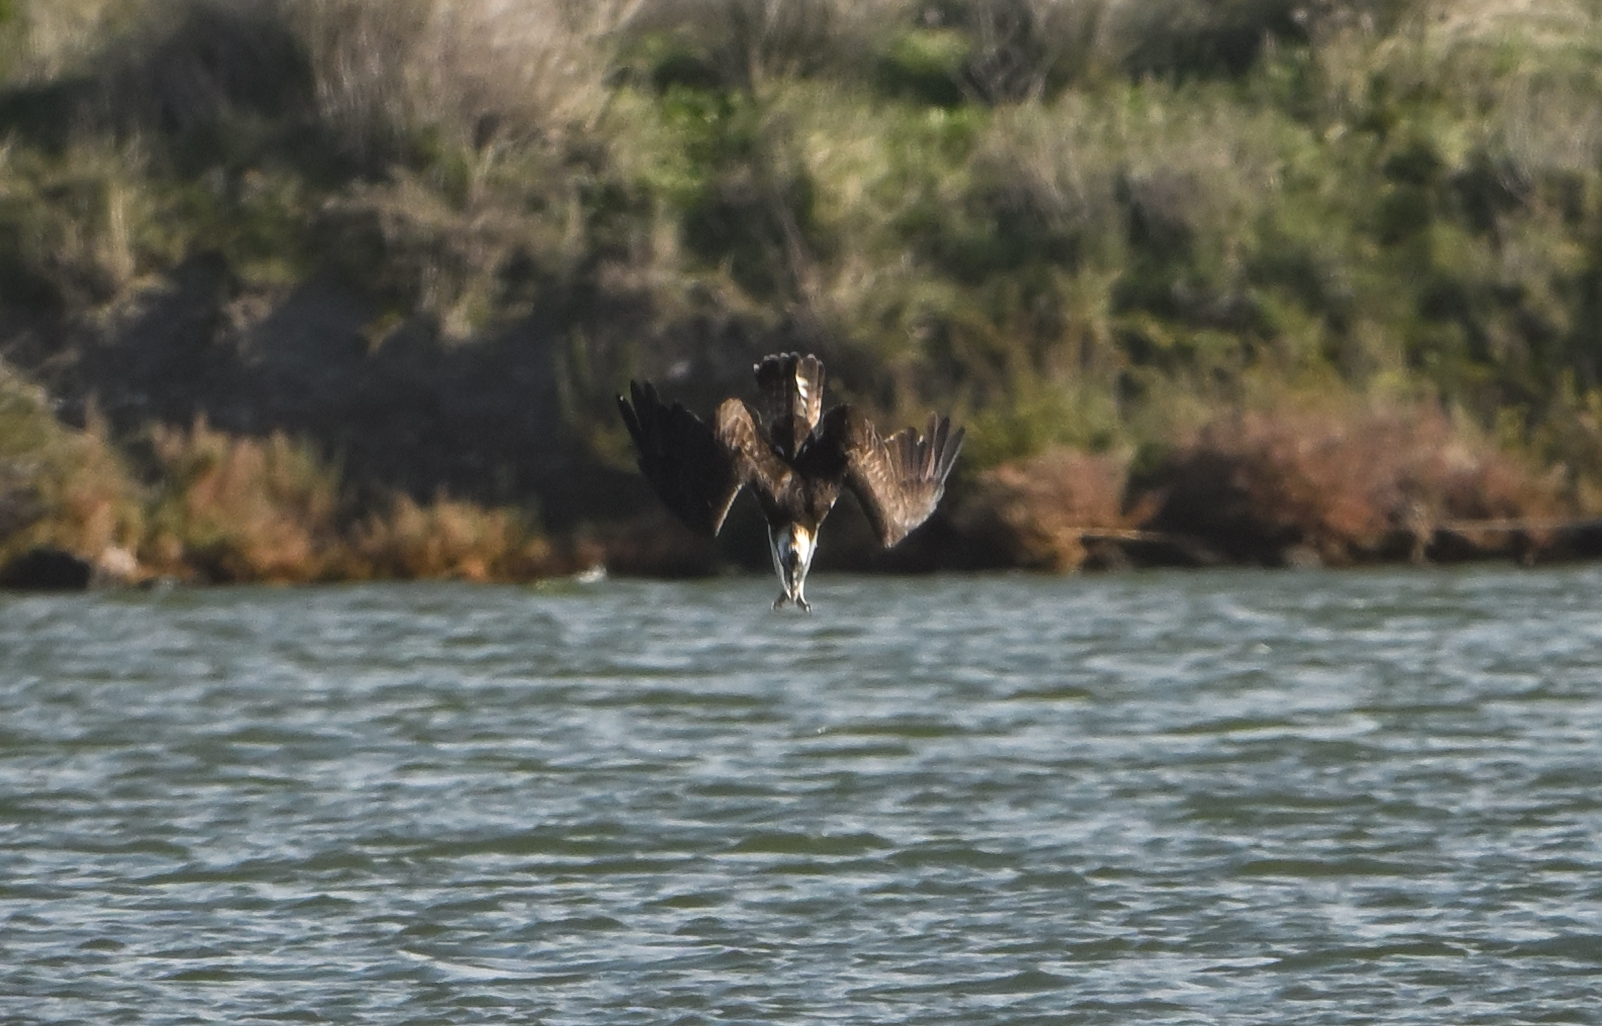 The entry of the Osprey into the water...